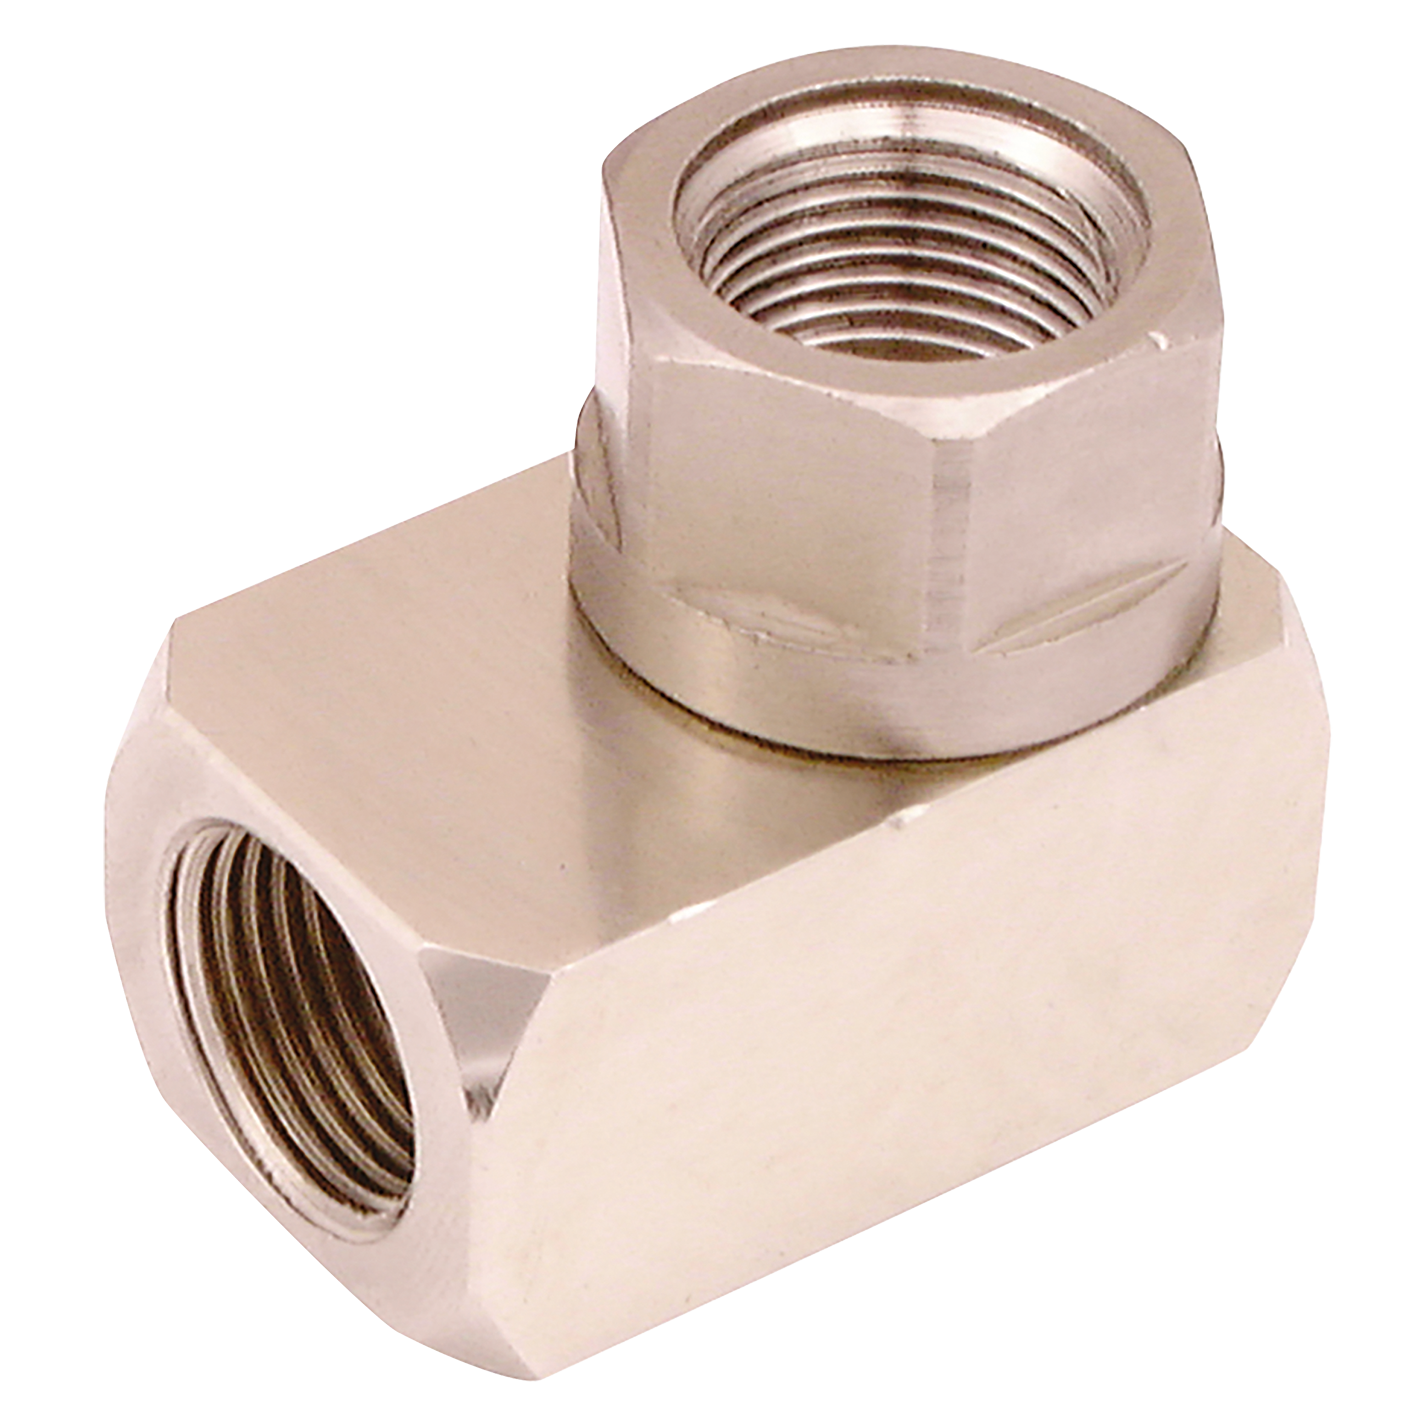 1 x 3/4" BSP Male Inlet x 1 x 3/4" BSP Female Outlets  Rotating Joint